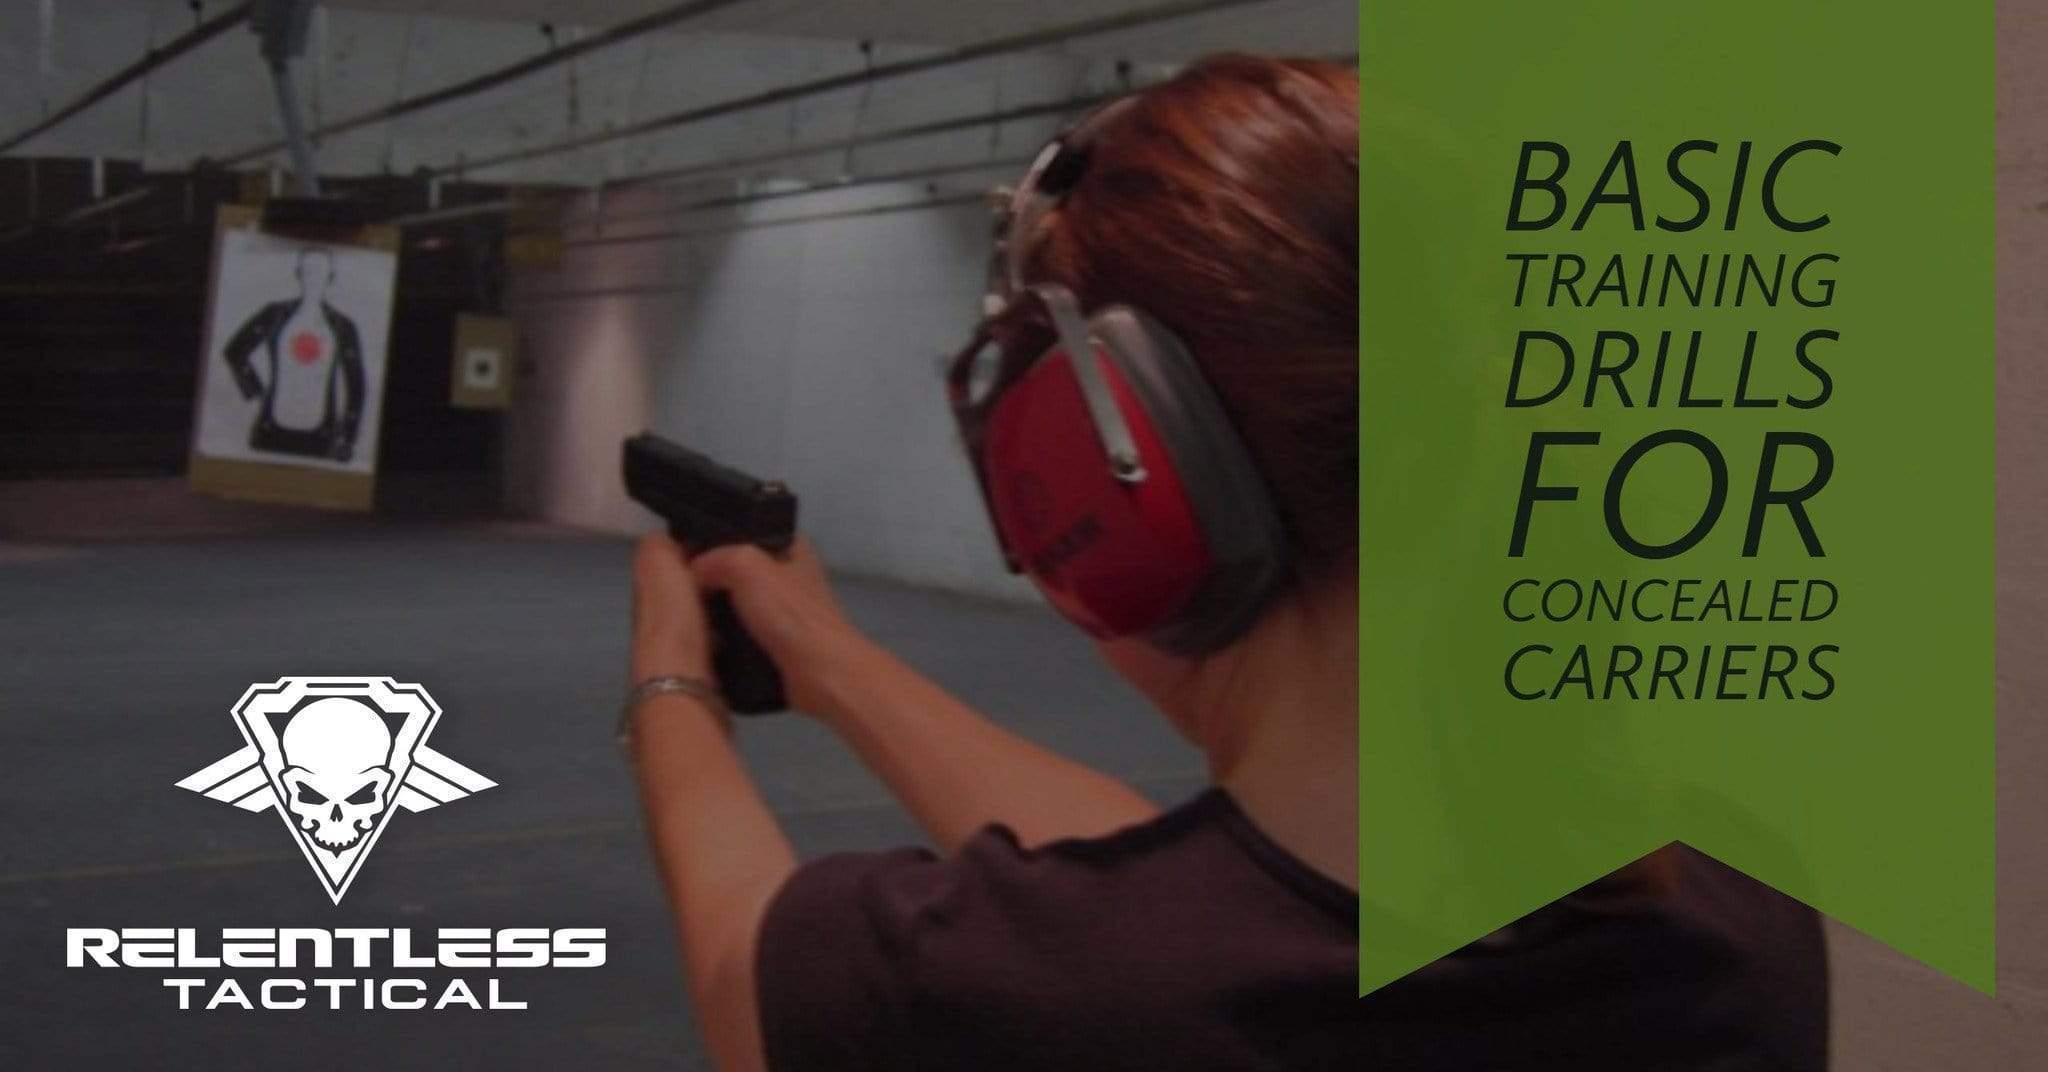 Basic Training Drills for Concealed Carriers